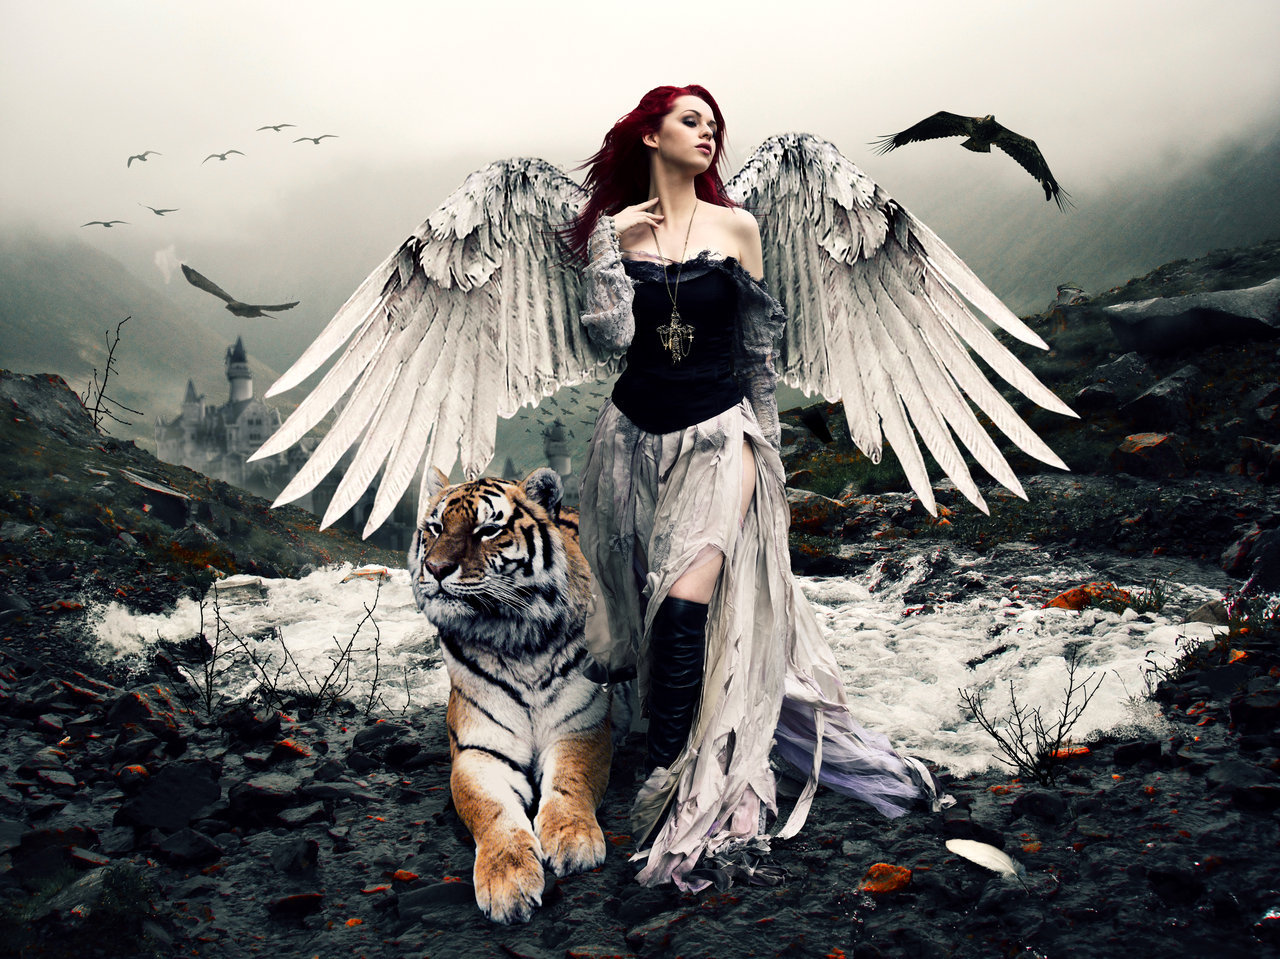 angels, tigers, girls, animals, fantasy, people lock screen backgrounds